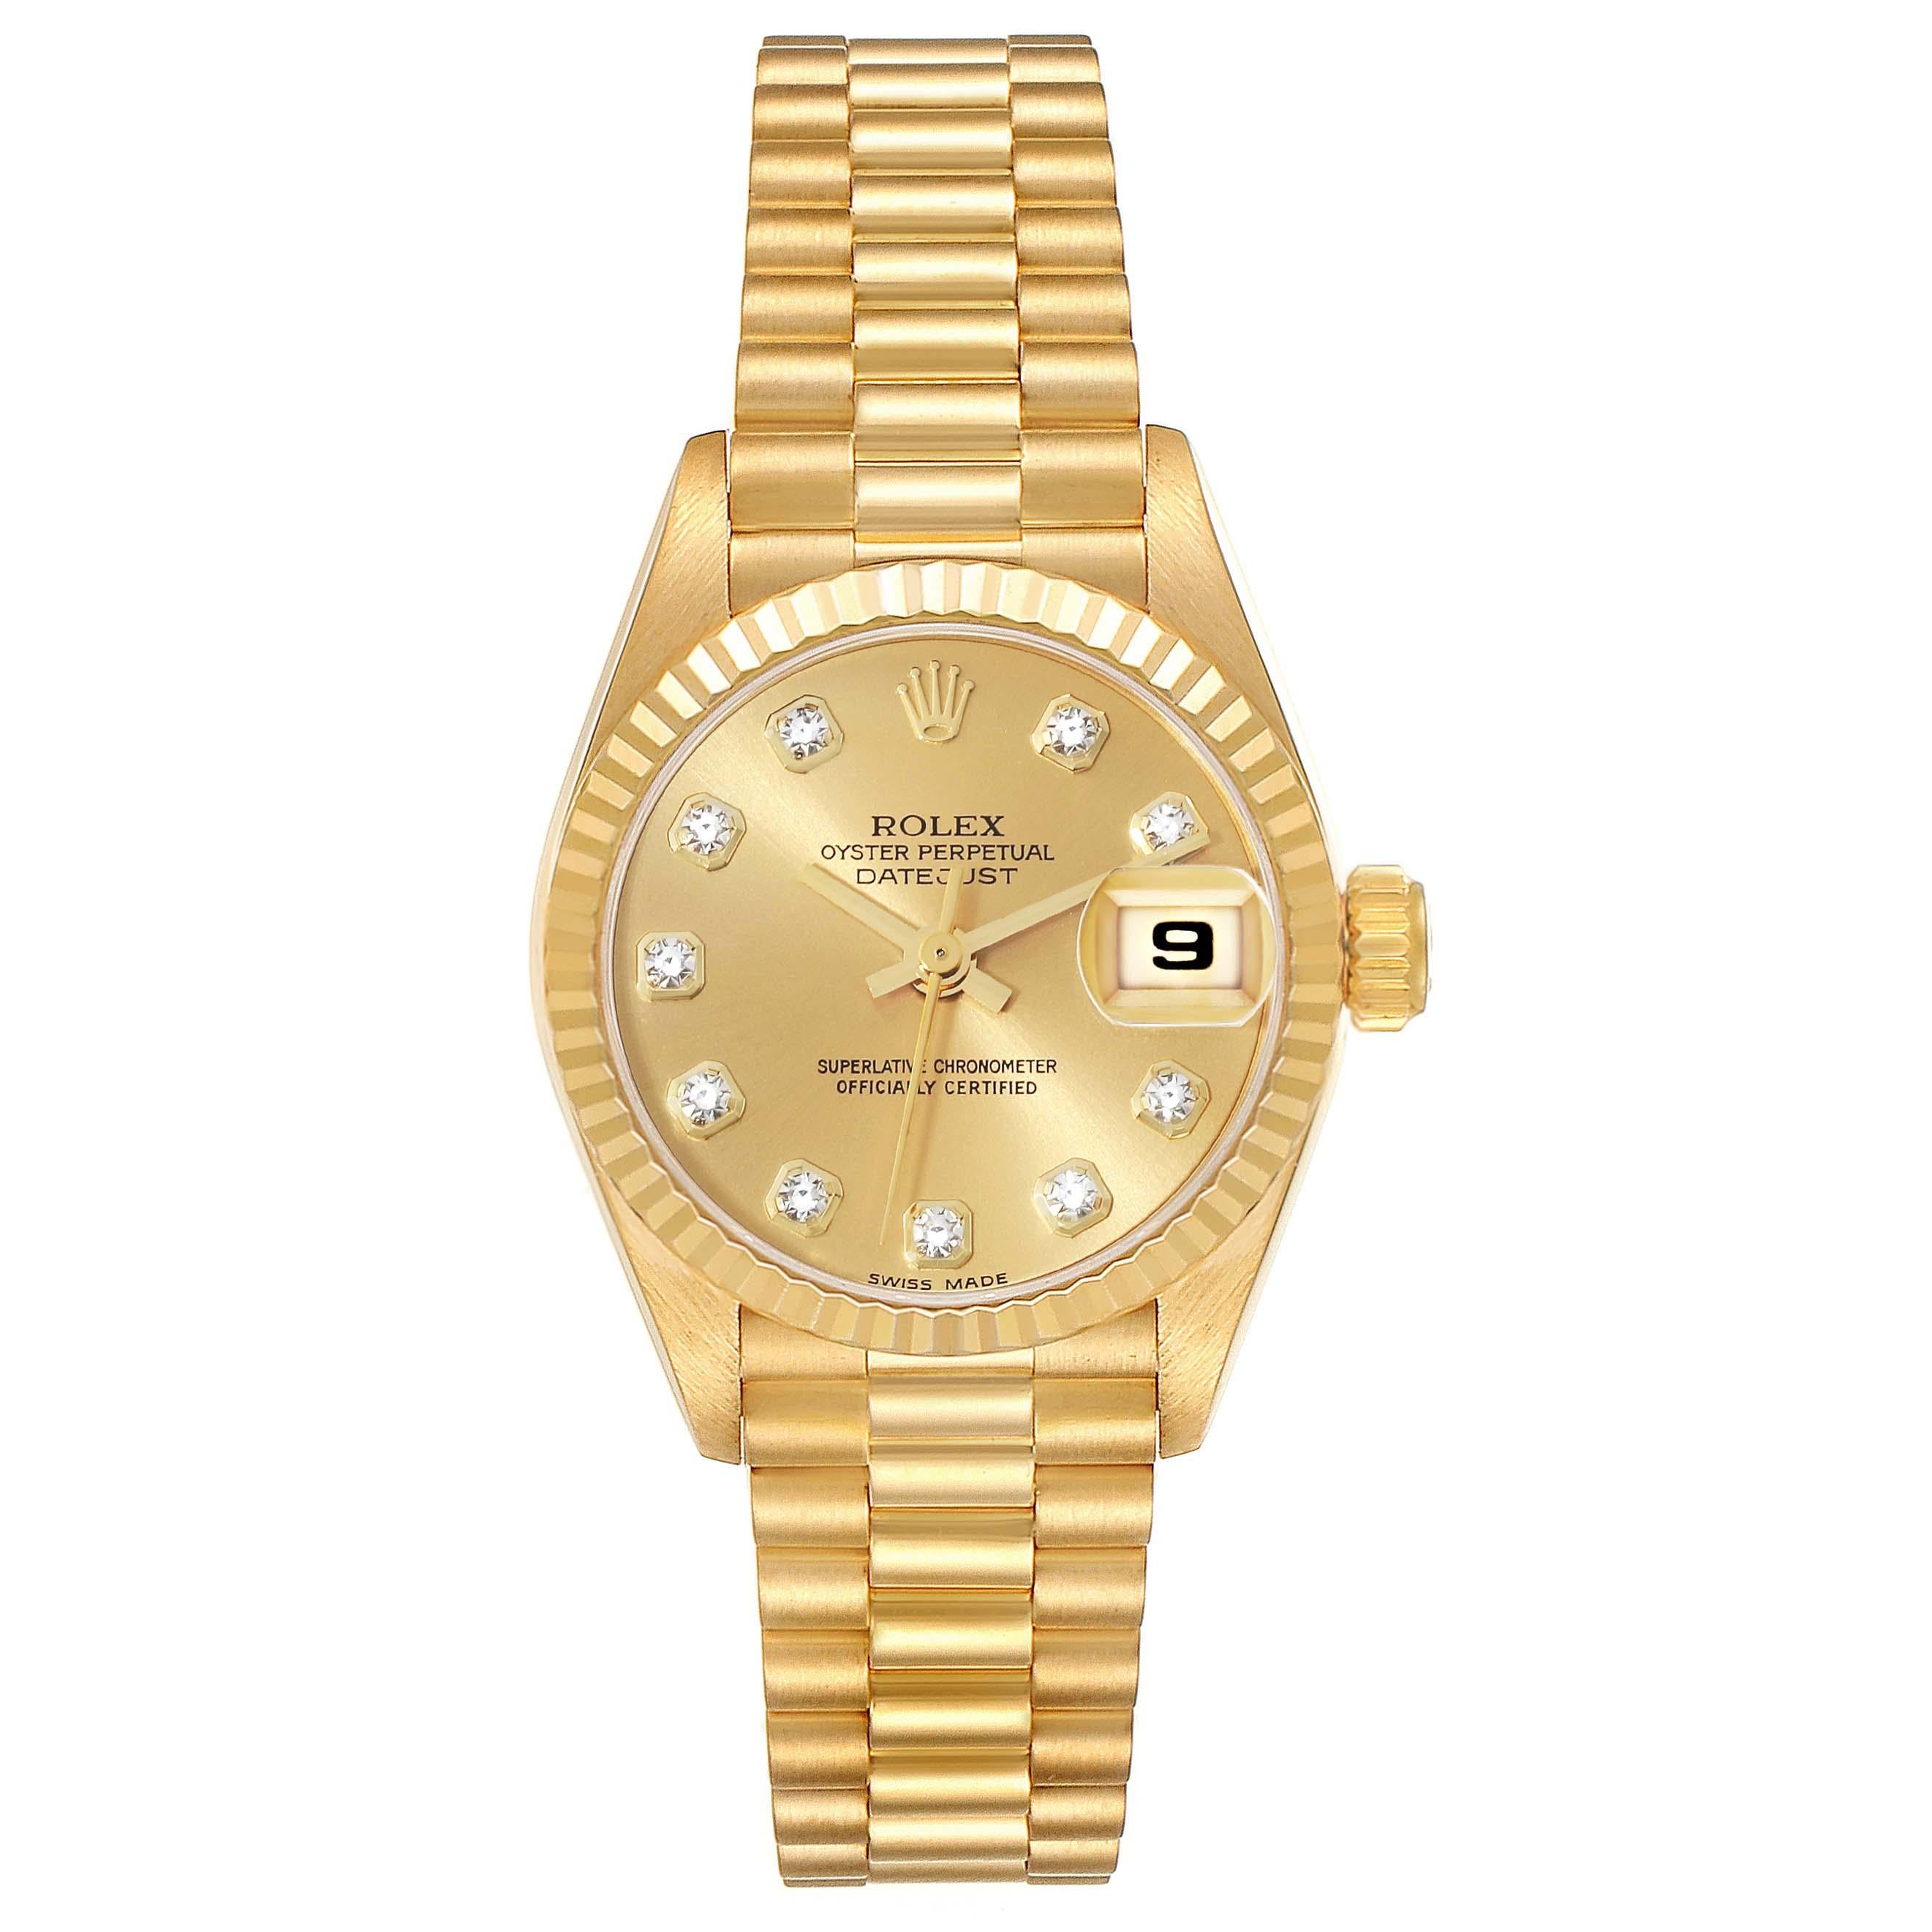 Rolex Datejust President Champagne Diamond Dial Yellow Gold Ladies Watch 69178. Officially certified chronometer automatic self-winding movement. 18k yellow gold oyster case 26.0 mm in diameter. Rolex logo on the crown. 18k yellow gold fluted bezel.